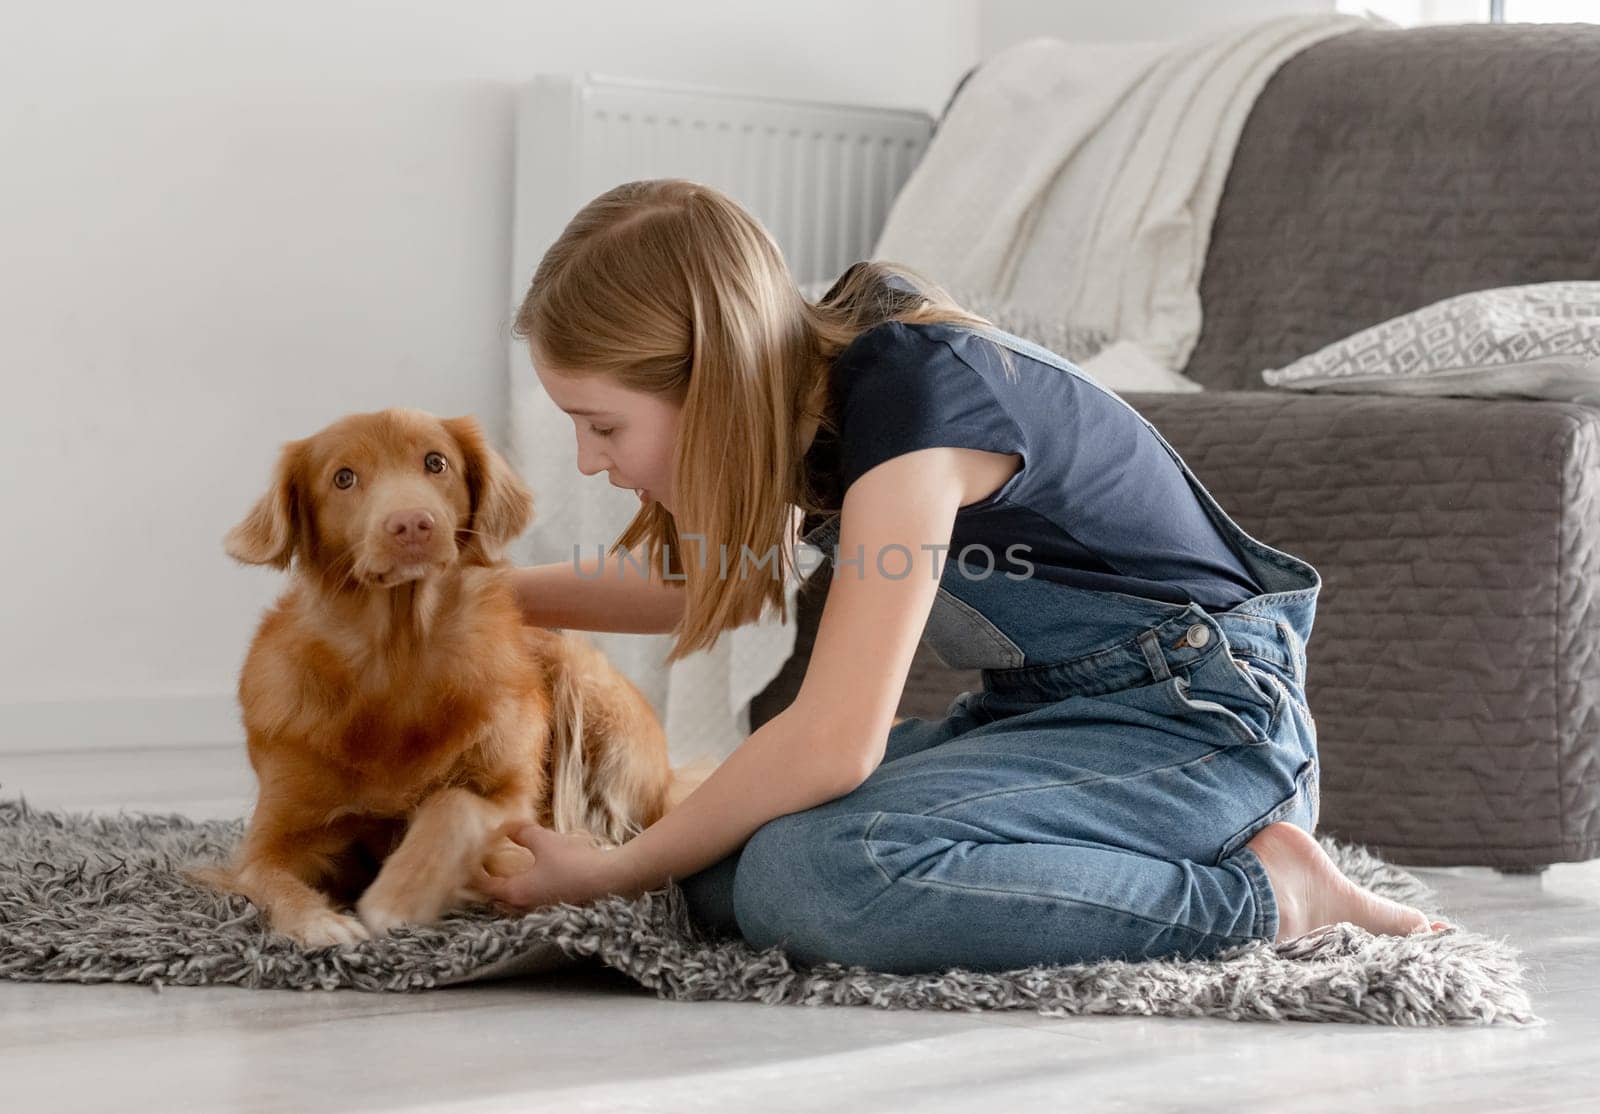 11-Year-Old Girl Plays With Nova Scotia Retriever On Home Floor by tan4ikk1